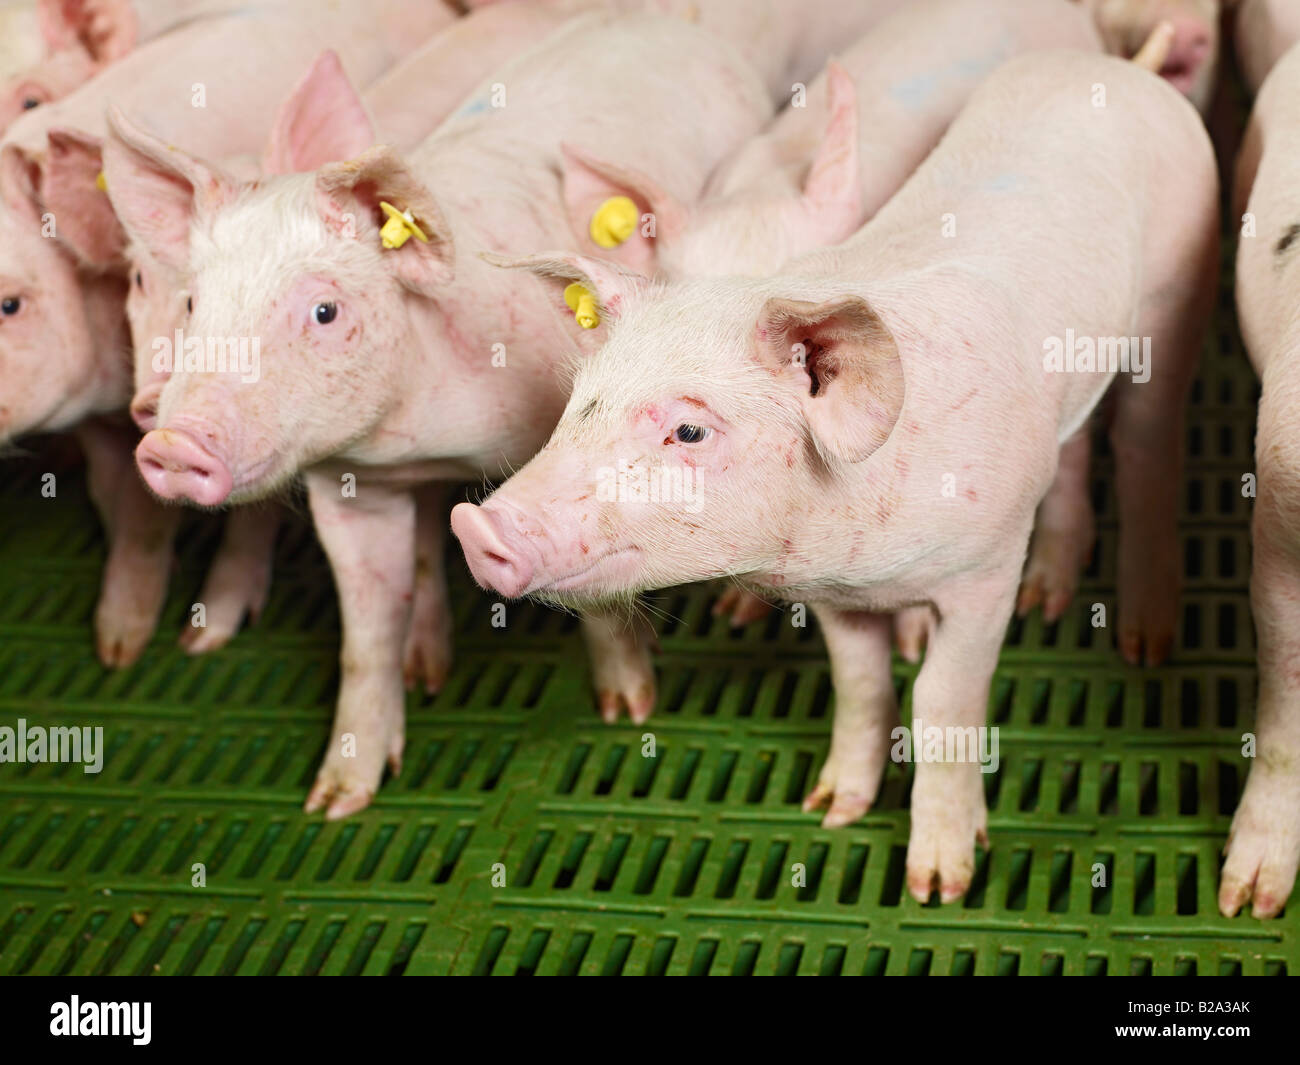 animal suffering, many piglets in a small pig sty Sus scrofa domestica PIG BREEDING, Heinsberg, Germany, Europe Tierleid Stock Photo